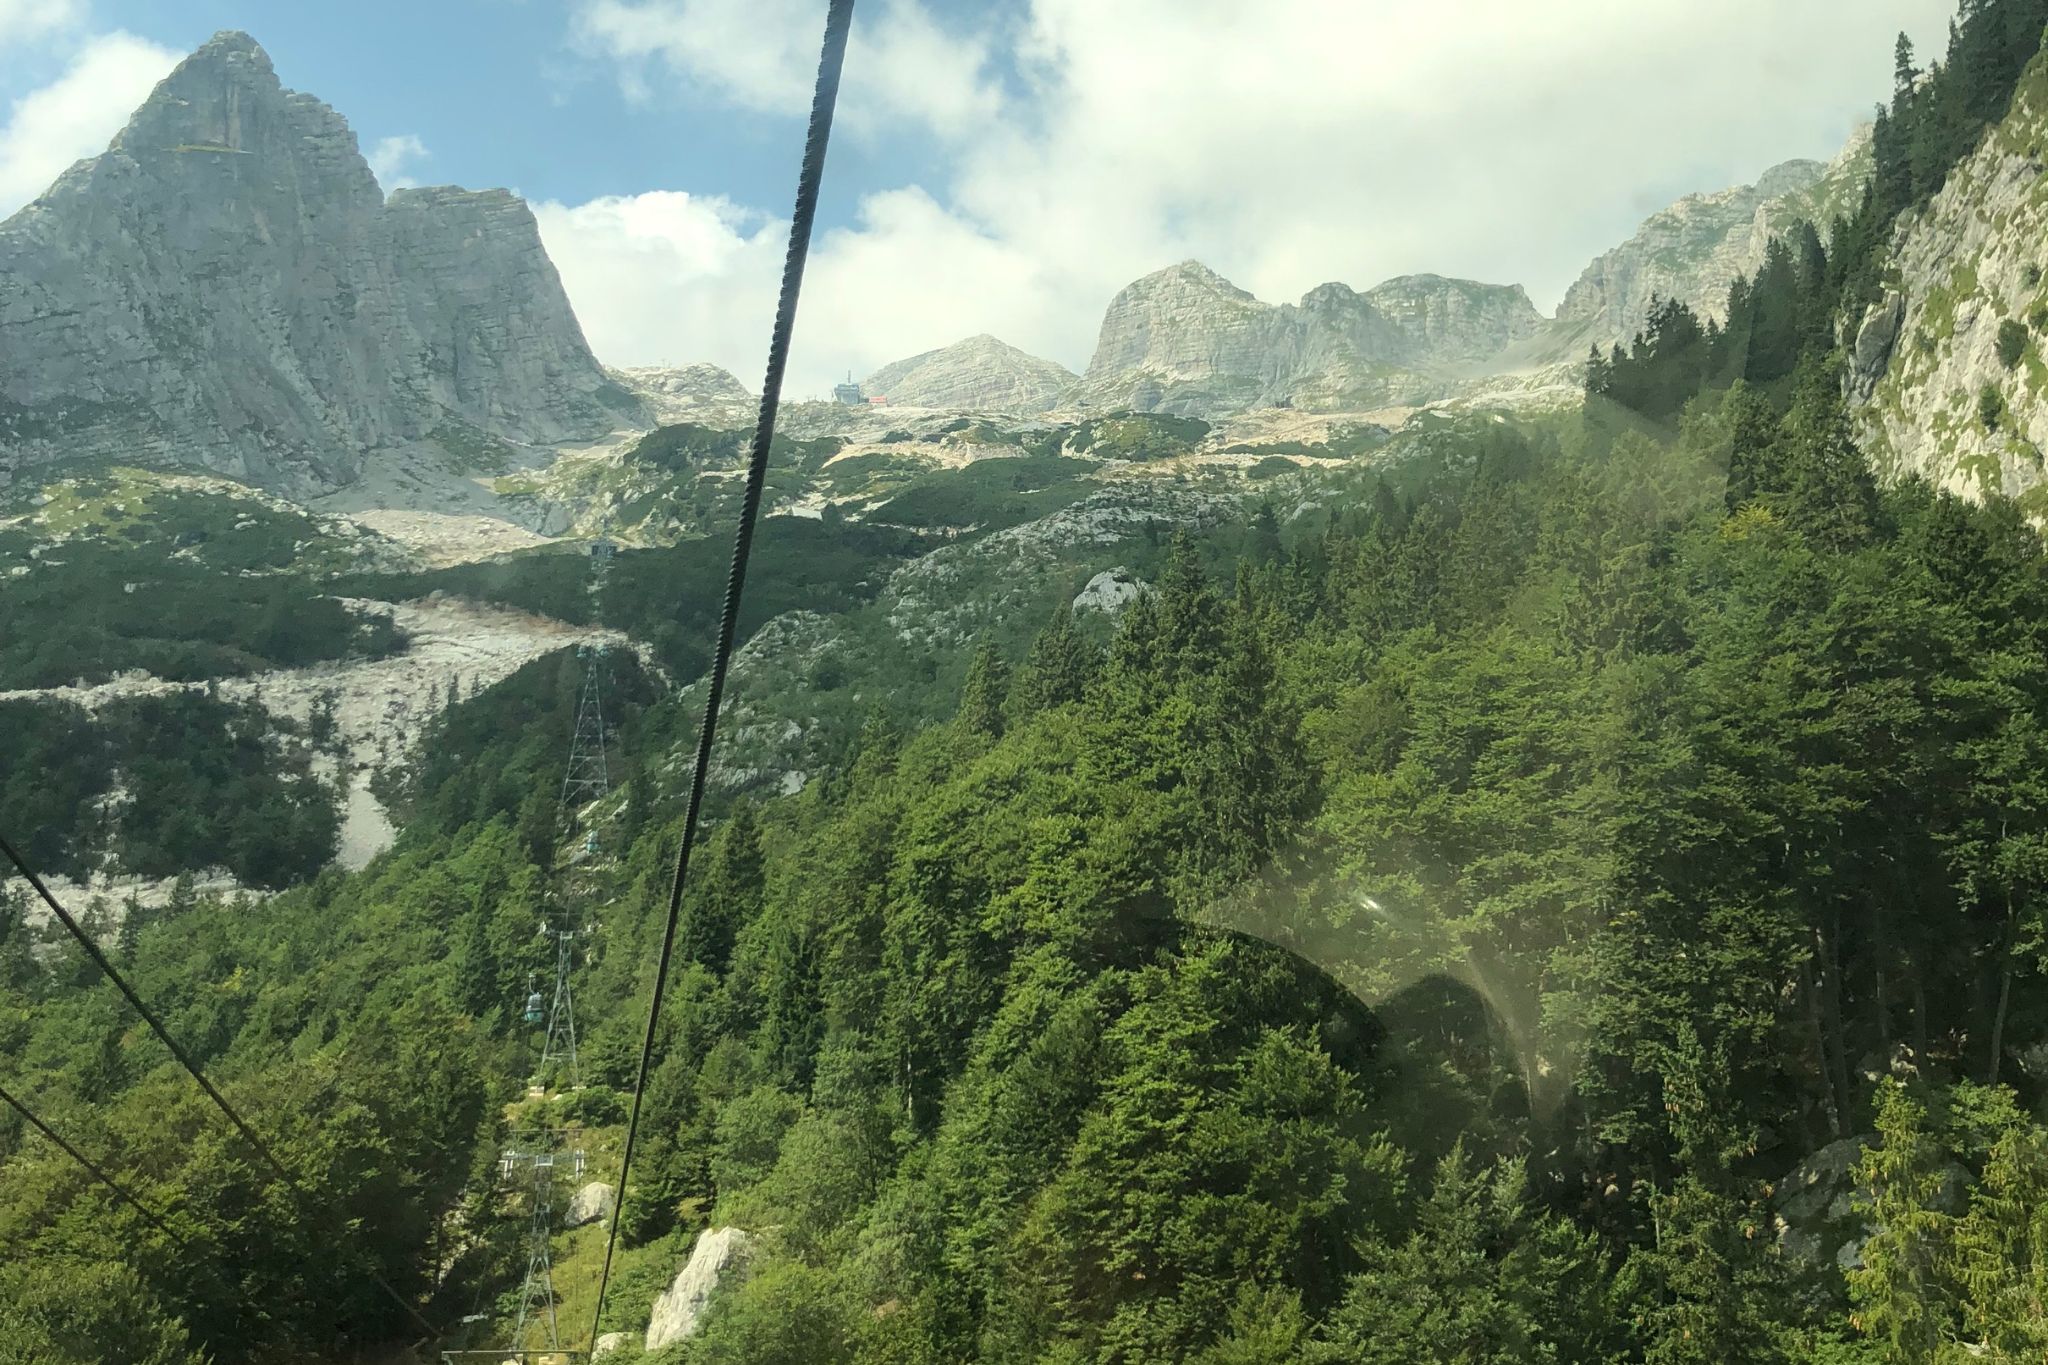 Views from the Kanin Cable Car